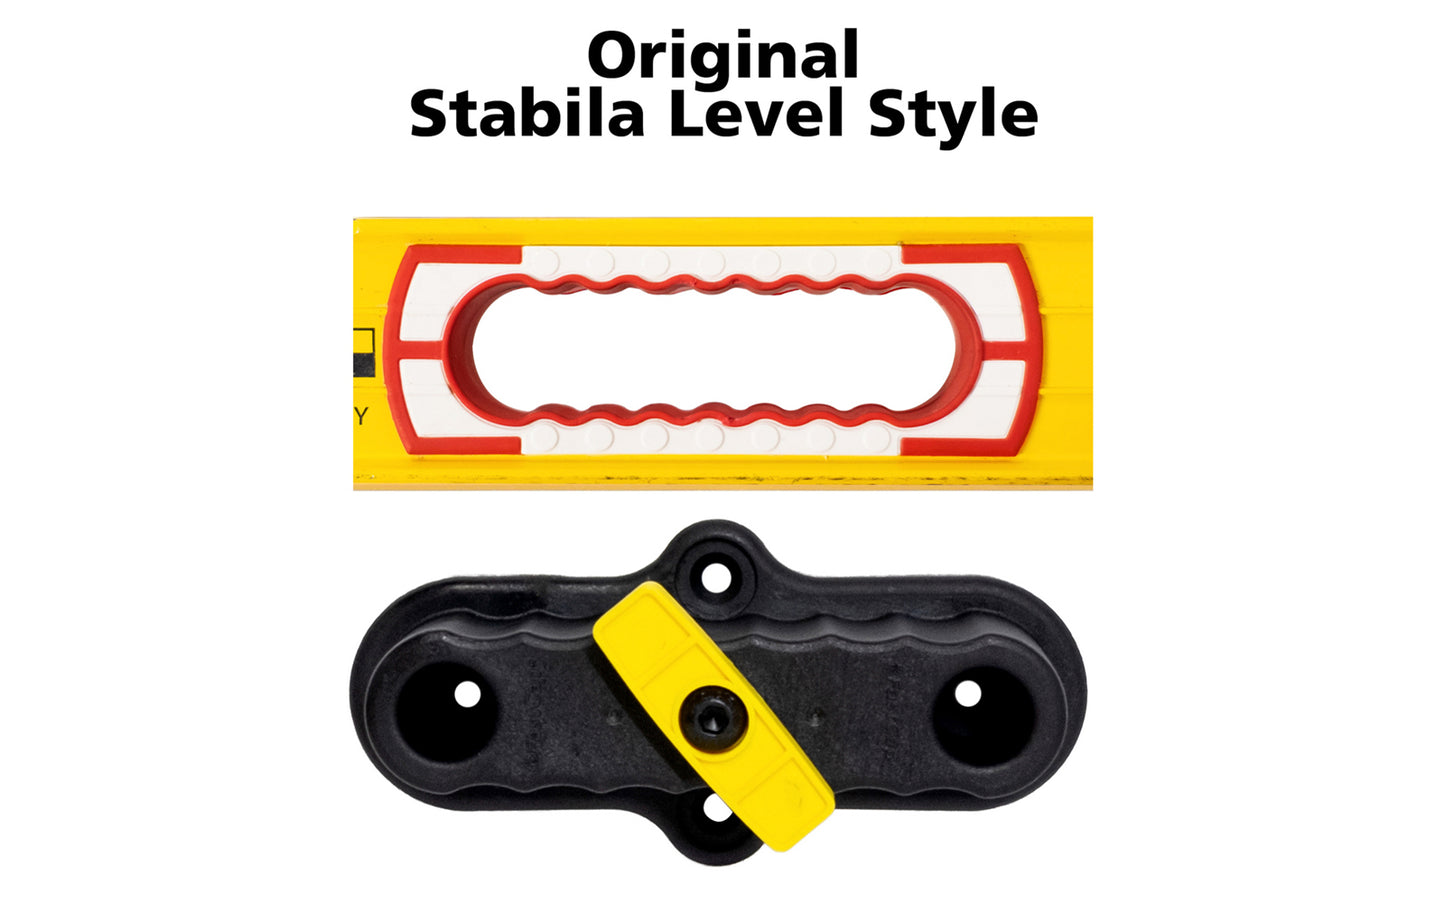 FastCap Level Rack is an innovative solution to securely & safely store your Stabila levels. Mount most Stabila levels vertically or horizontally on drywall, bare studs, garage door panels, trailer walls, or work truck. Cam-lock provides a positive lock that holds your level tight, secure, & rattle-free. Original Stabila Style